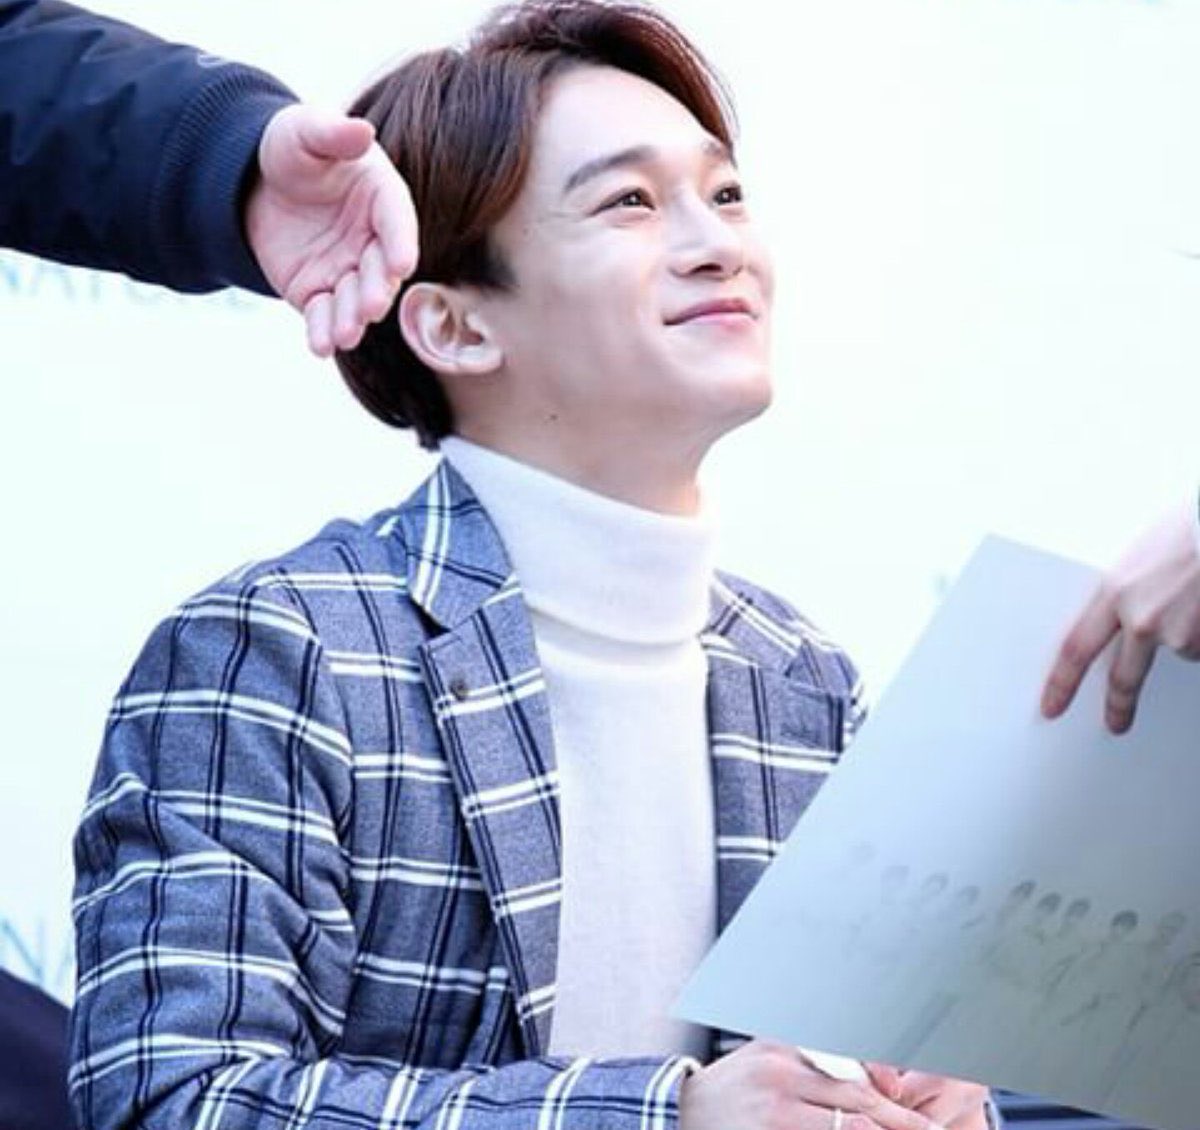 As mentioned on 'Knowing Bros', Chen earned himself the ‘Fansign Boyfriend' title. When he does a signing for a fan, he always makes sure to maintain eye contact with the fan and give them a warm smile while talking to them because he knows how important that moment is for them.